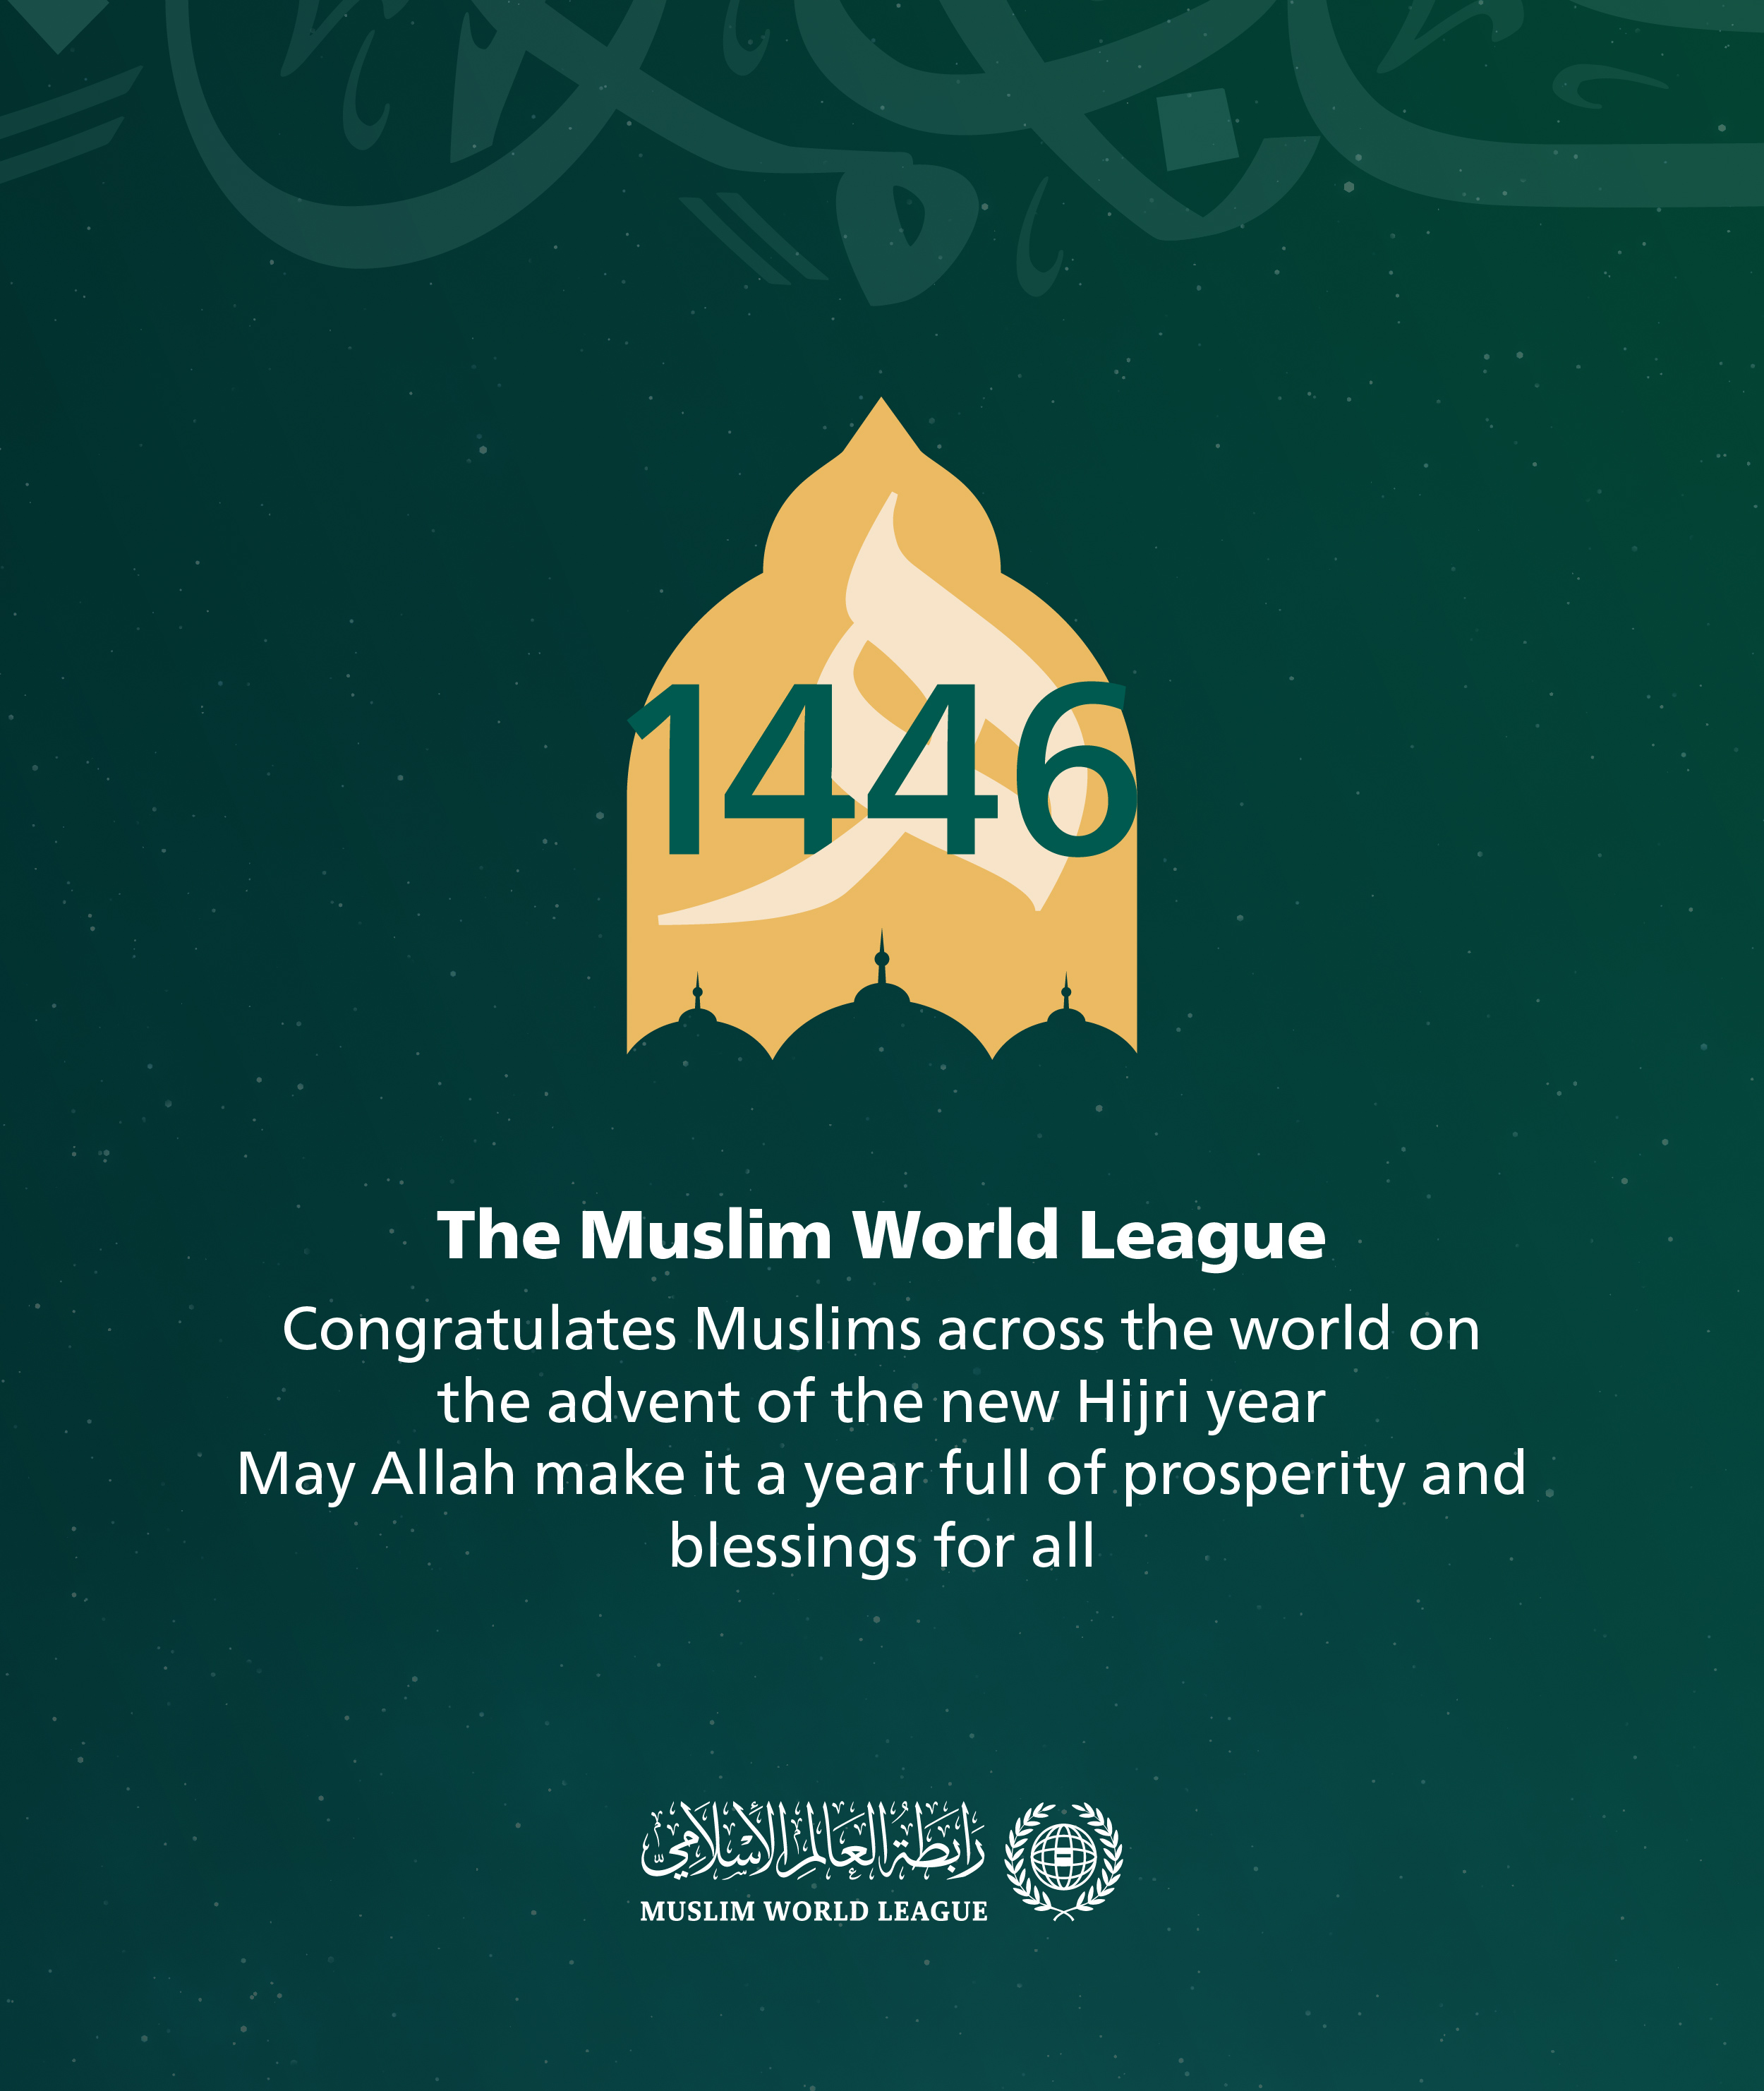 The Muslim World League, congratulates Muslims across the world on the advent of the new Hijri year, may Allah make it a year full of prosperity and blessings for all.